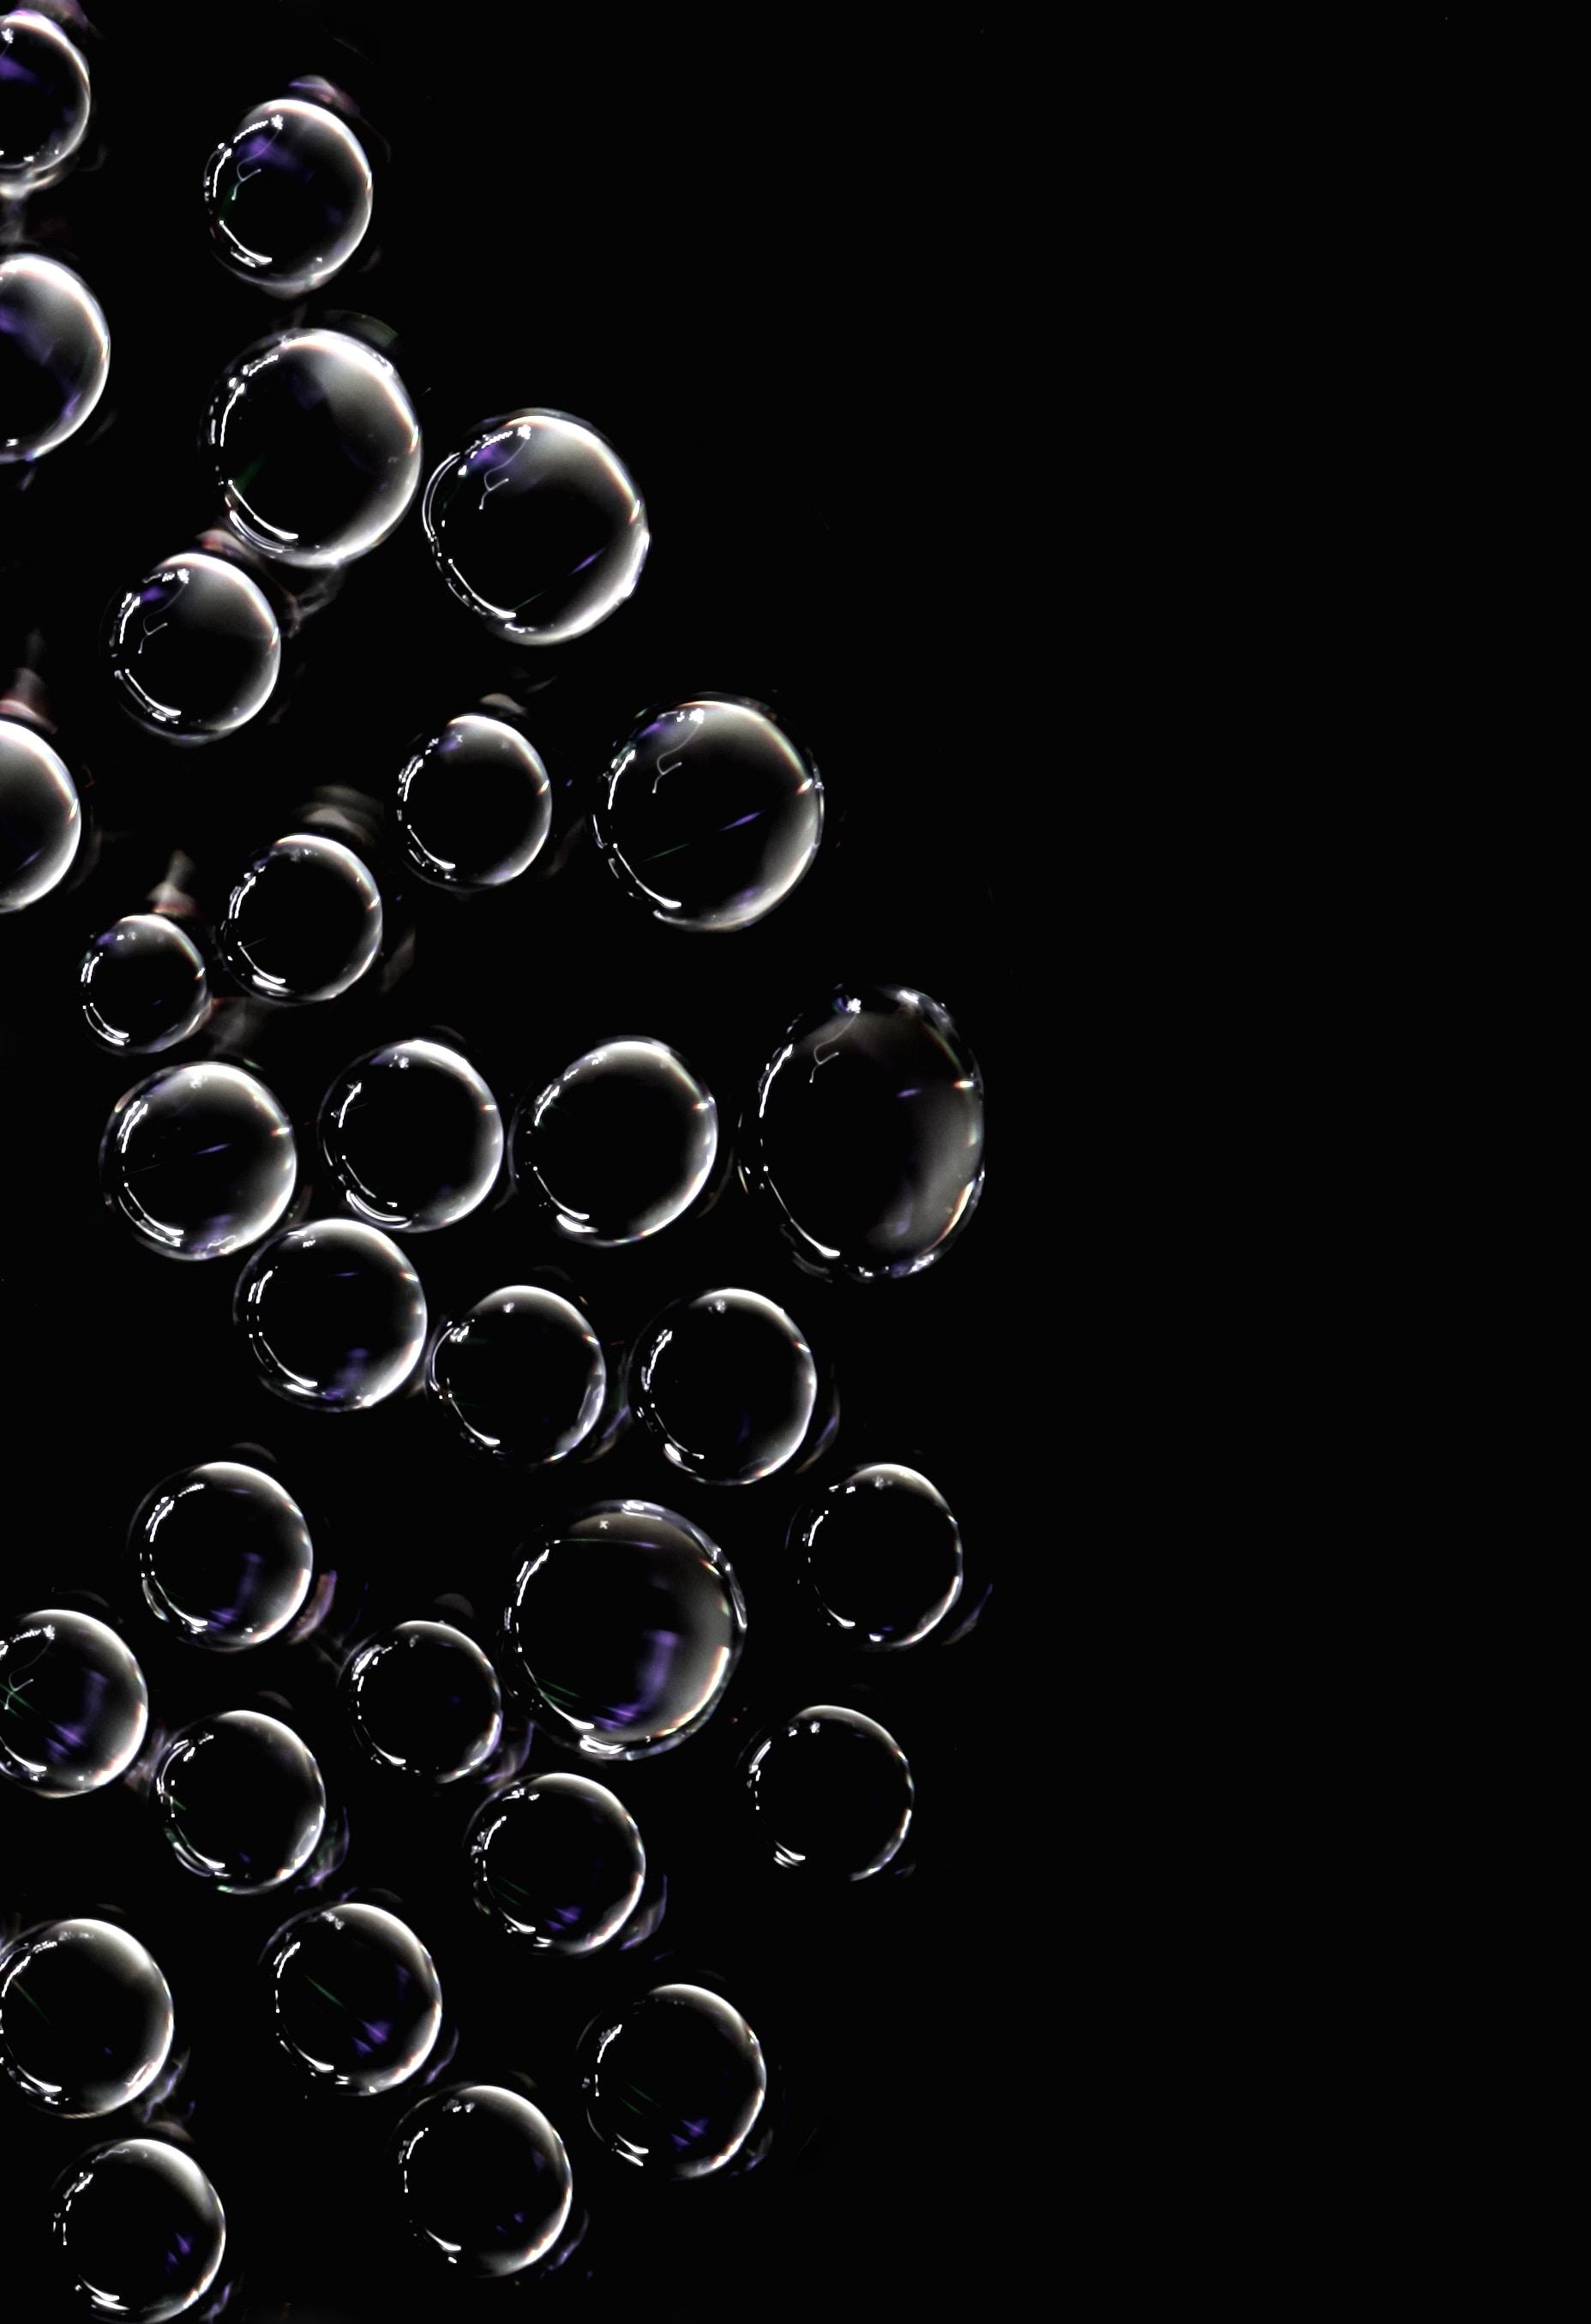 Bubble Picture. Download Free Image